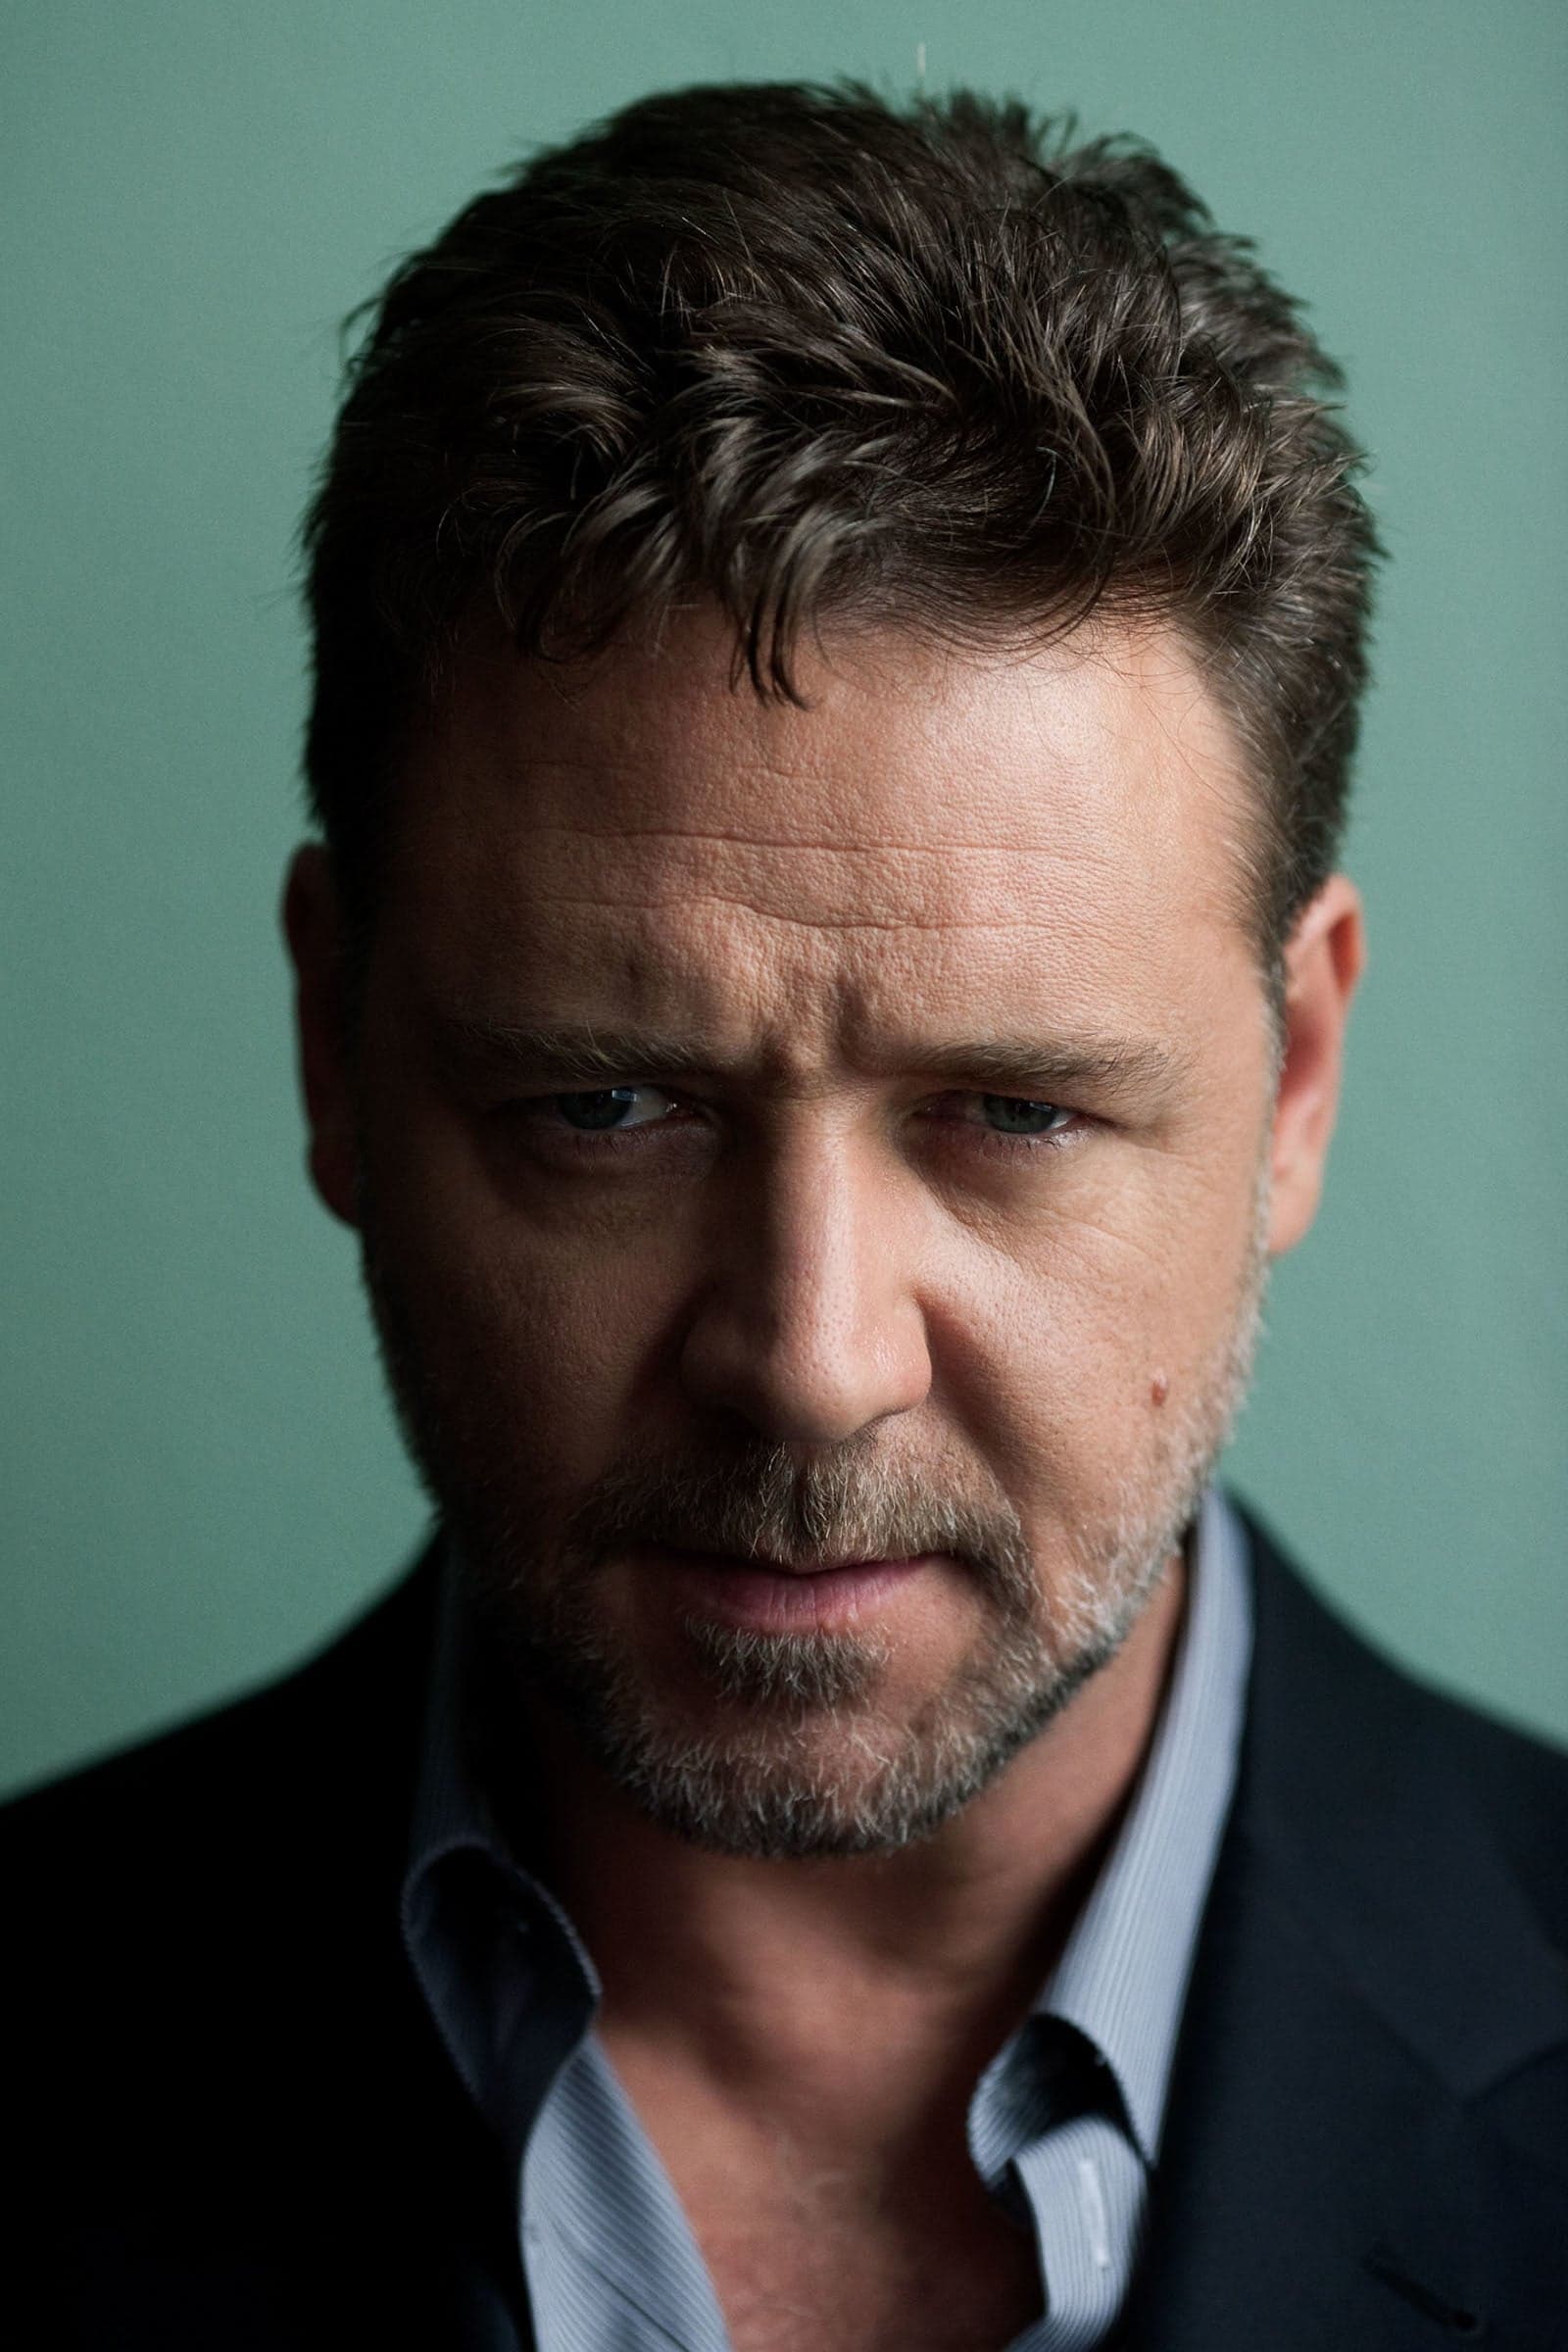 Russell Crowe | Wendell "Bud" White